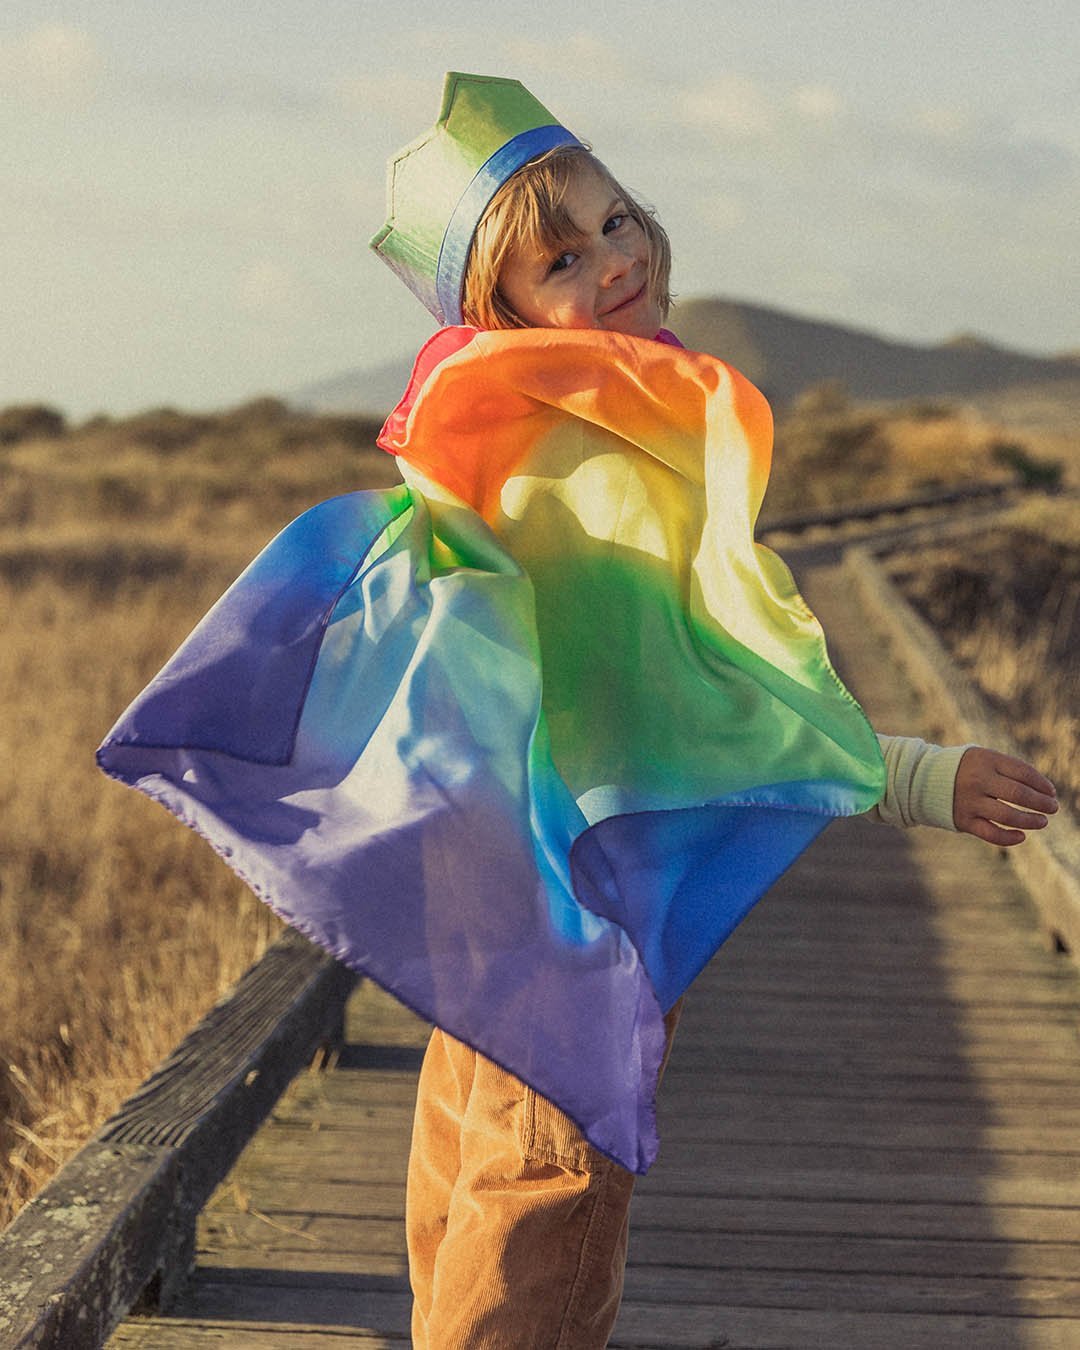 Child turning and smiling with rainbow cape and crown on a board walk with dried grass fields to the sides